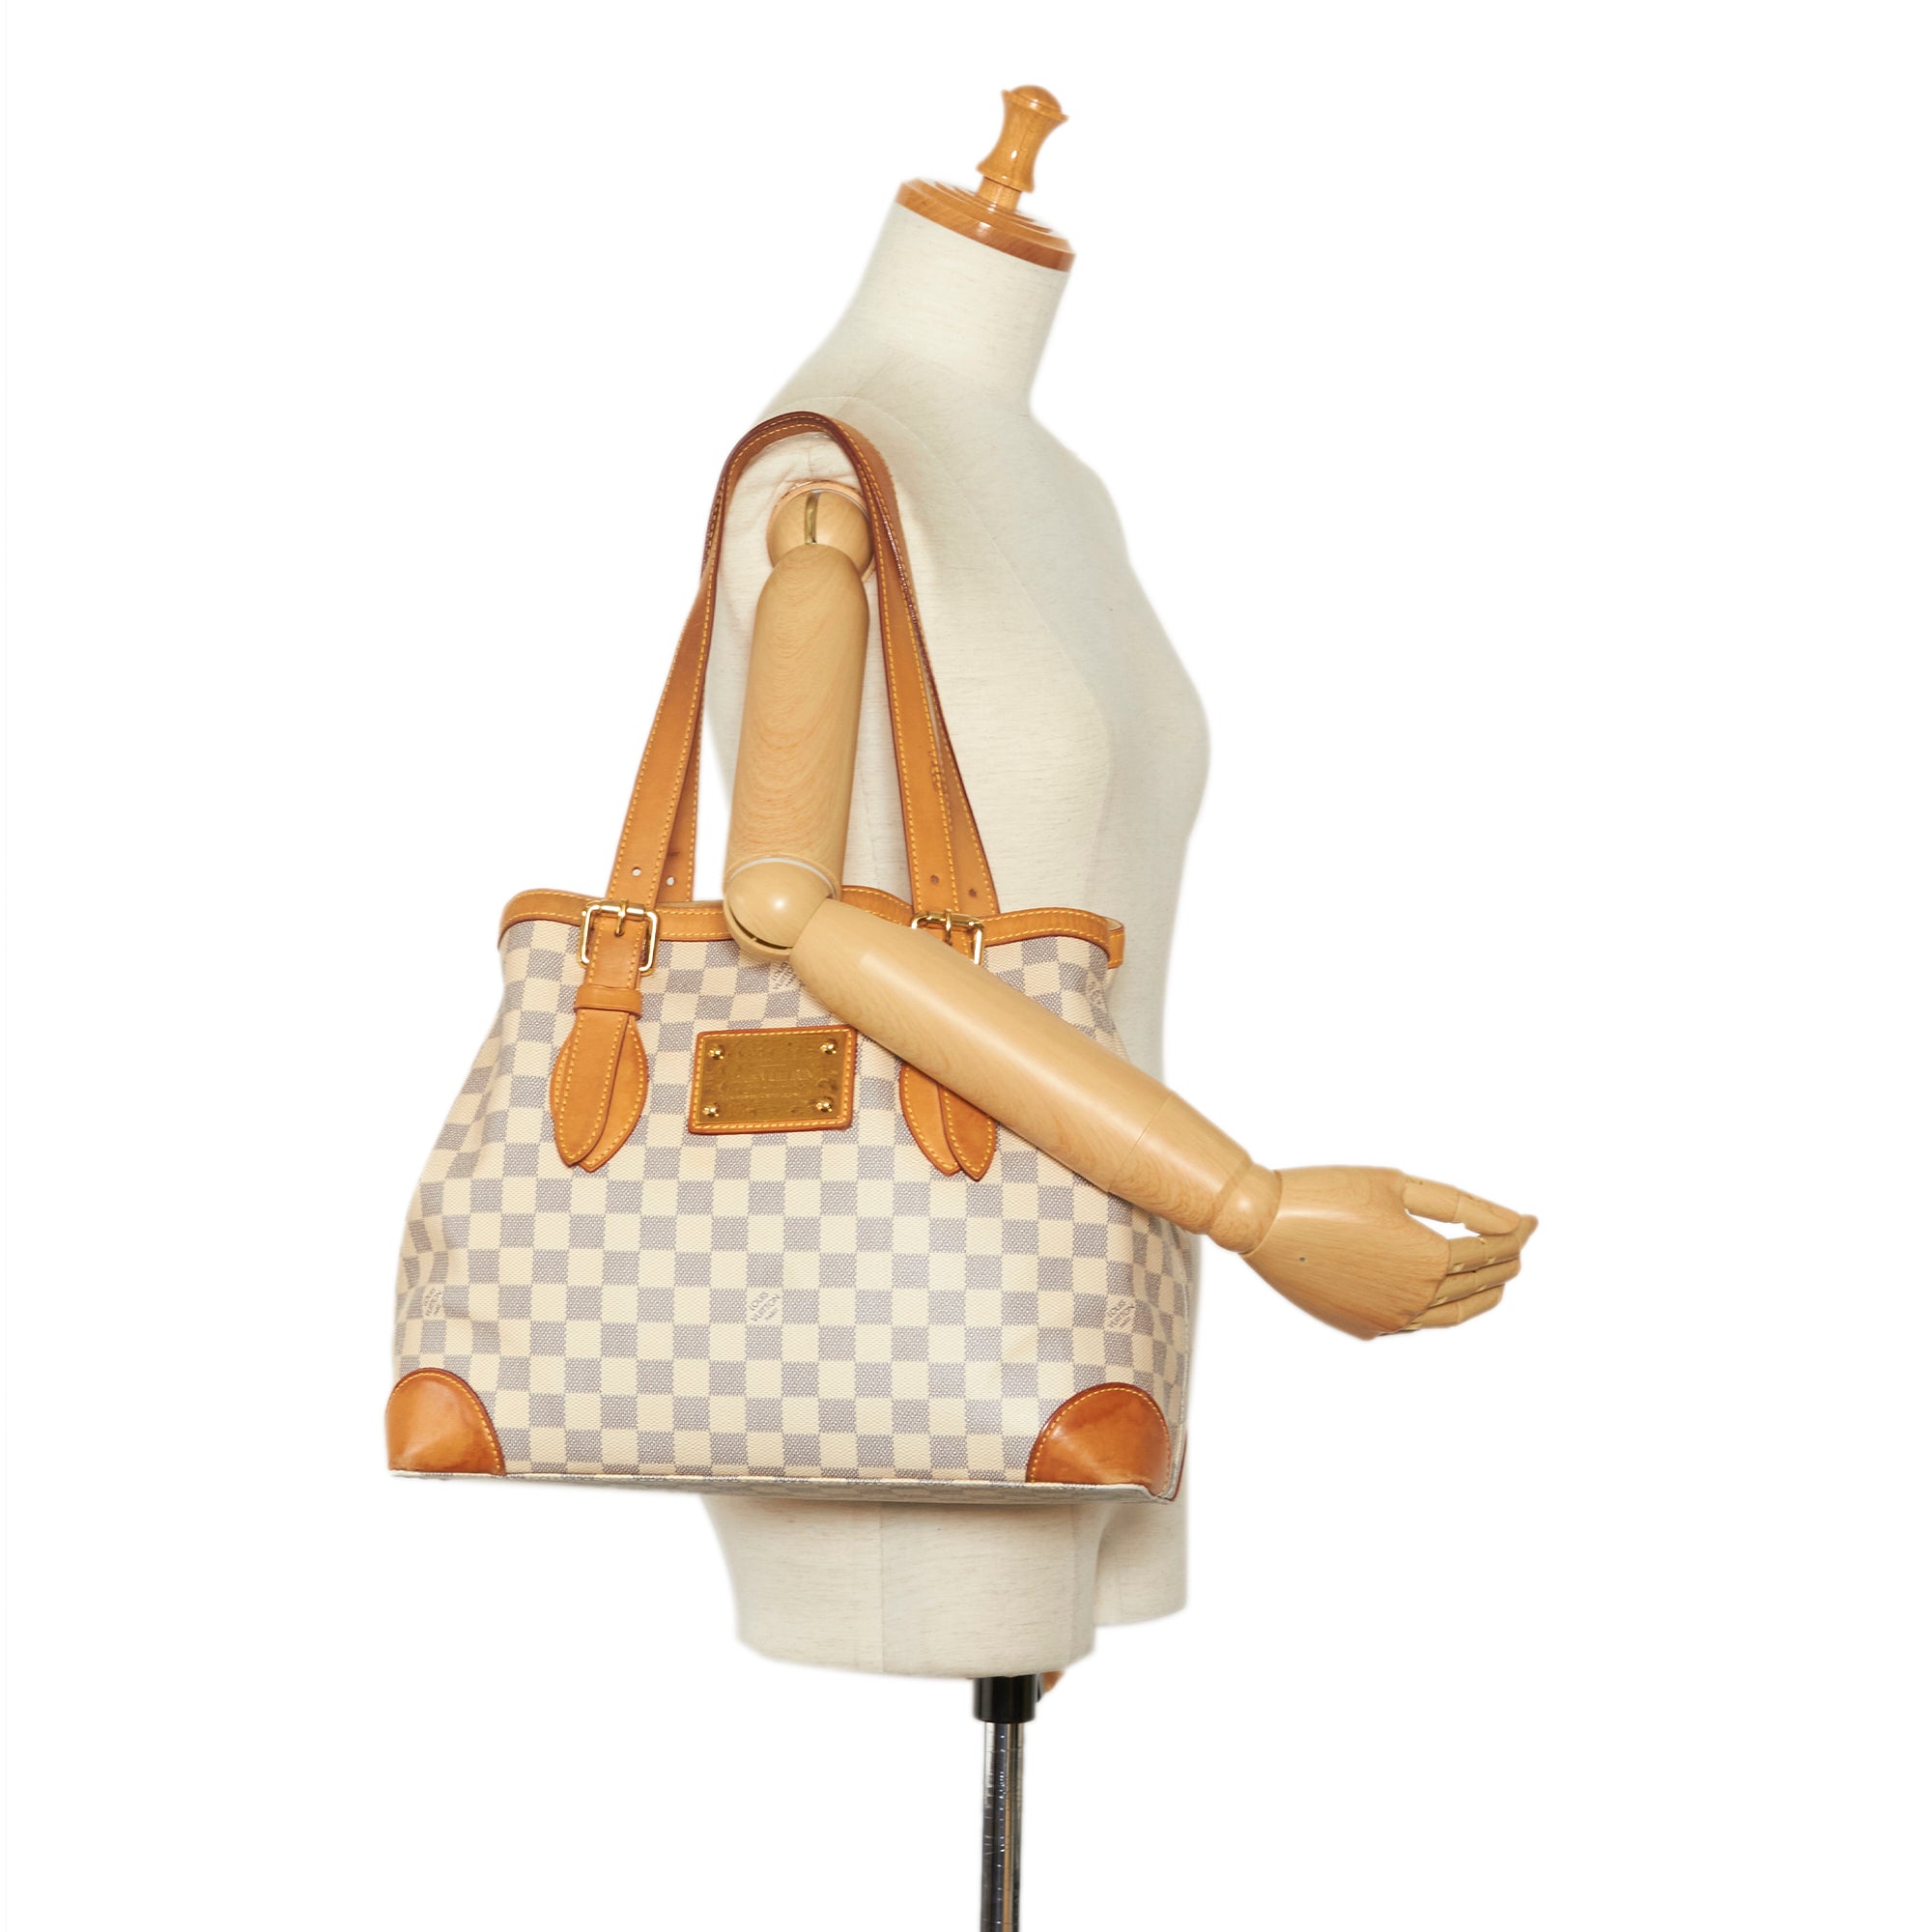 Preowned Louis Vuitton Hampstead Damien Azur bag. See pics for condition  details